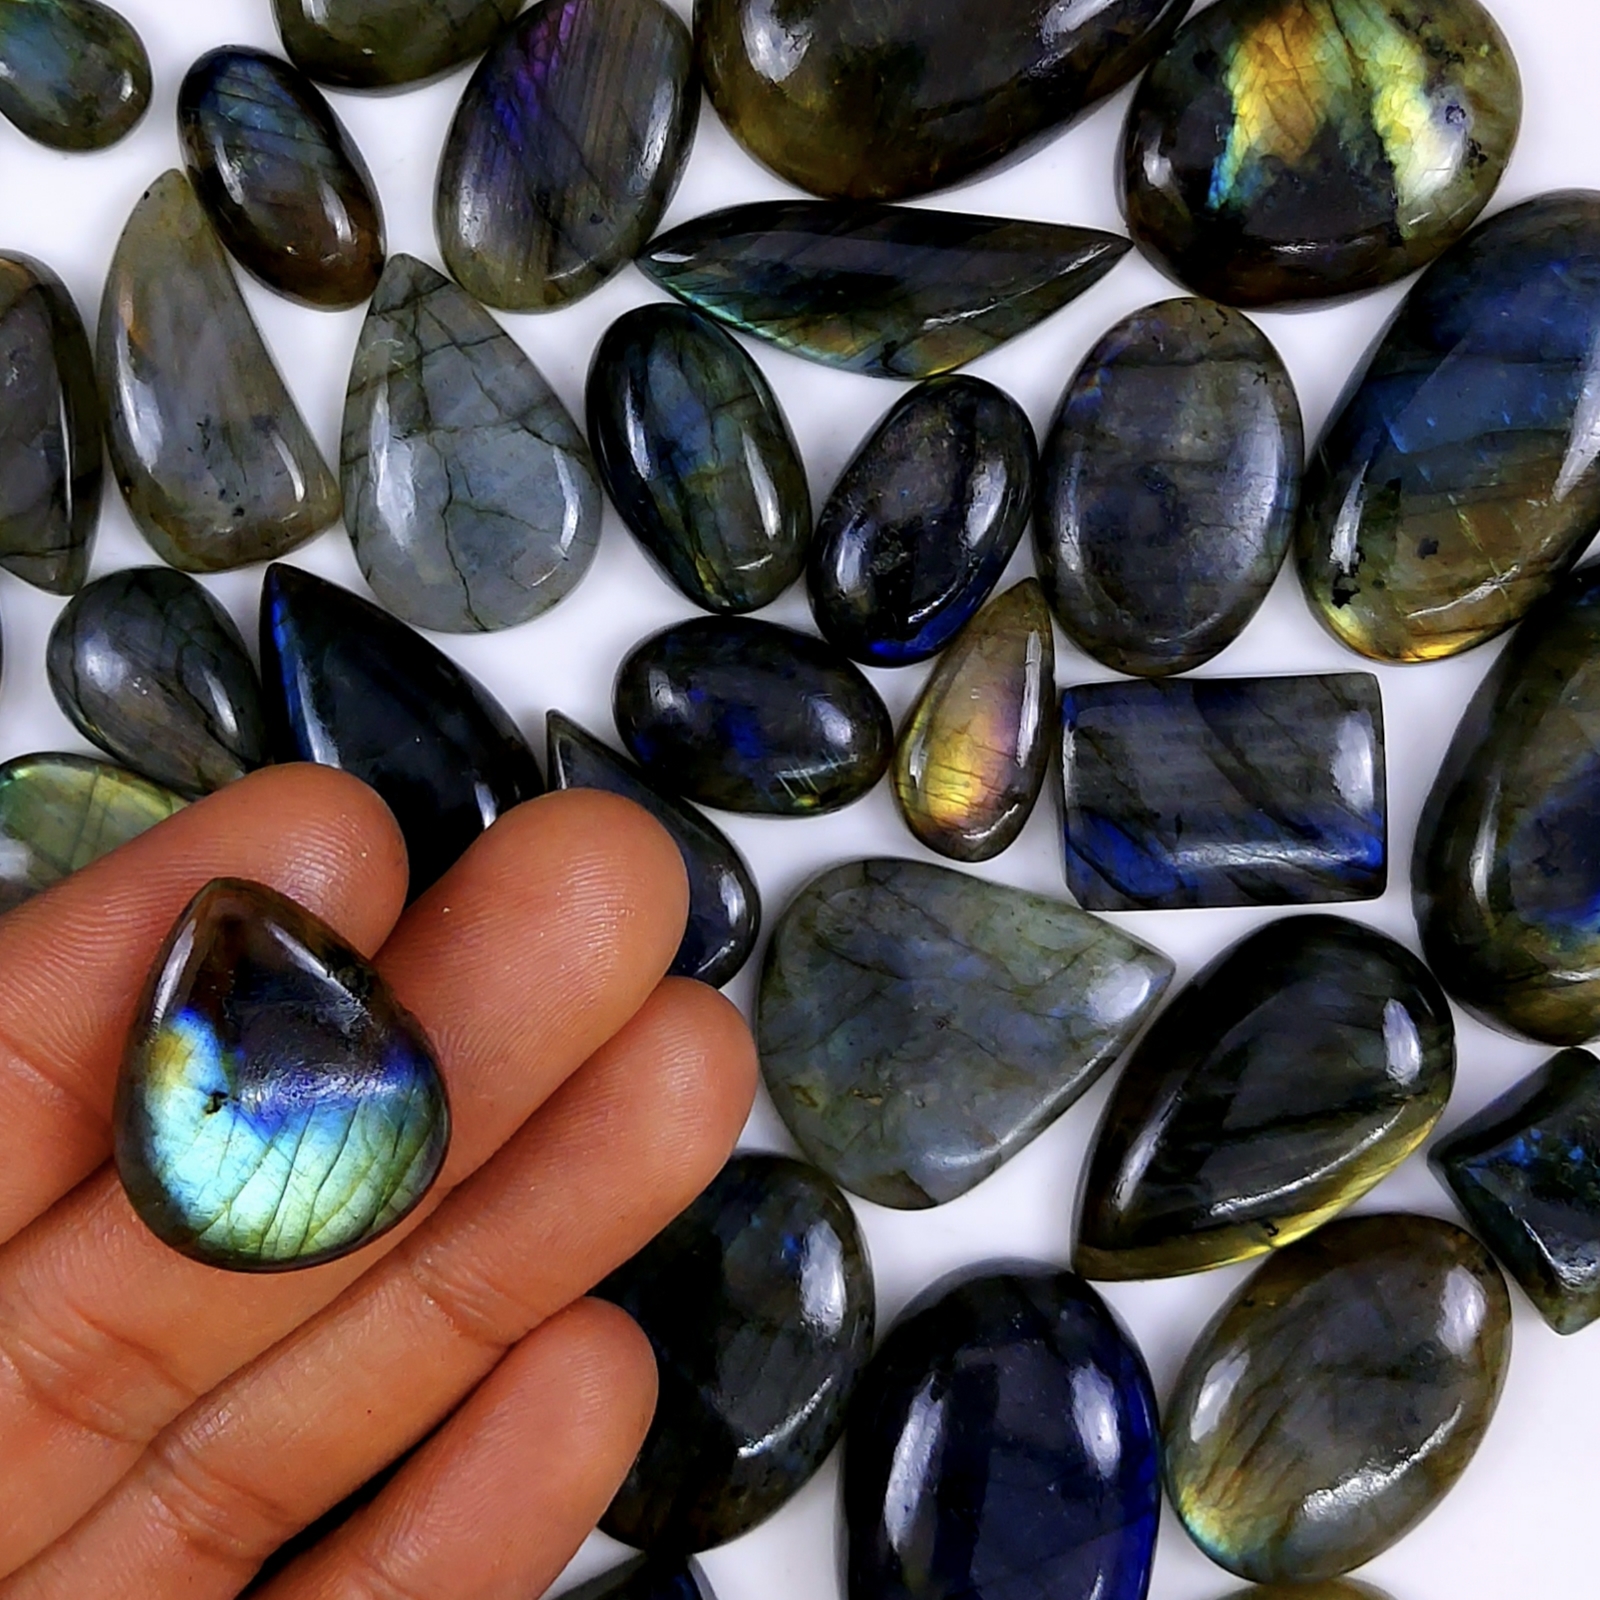 47pc 1662Cts Labradorite Cabochon Multifire Healing Crystal For Jewelry Supplies, Labradorite Necklace Handmade Wire Wrapped Gemstone Pendant 46x35  22x14mm#6379